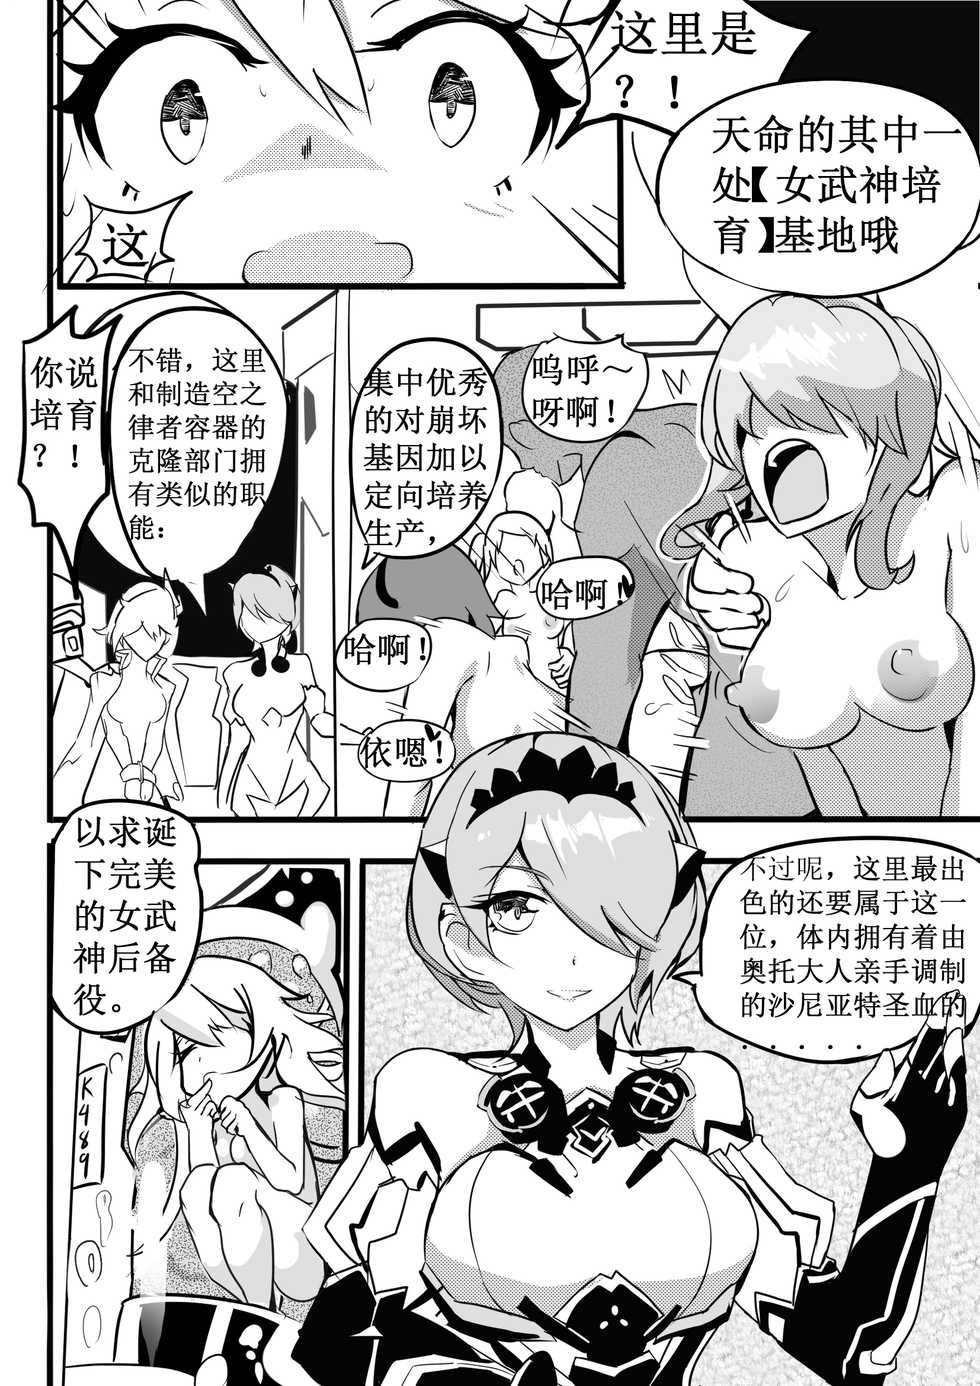 (White Bank) Collapse 1-6 (Honkai Impact 3rd) [Chinese] - Page 32